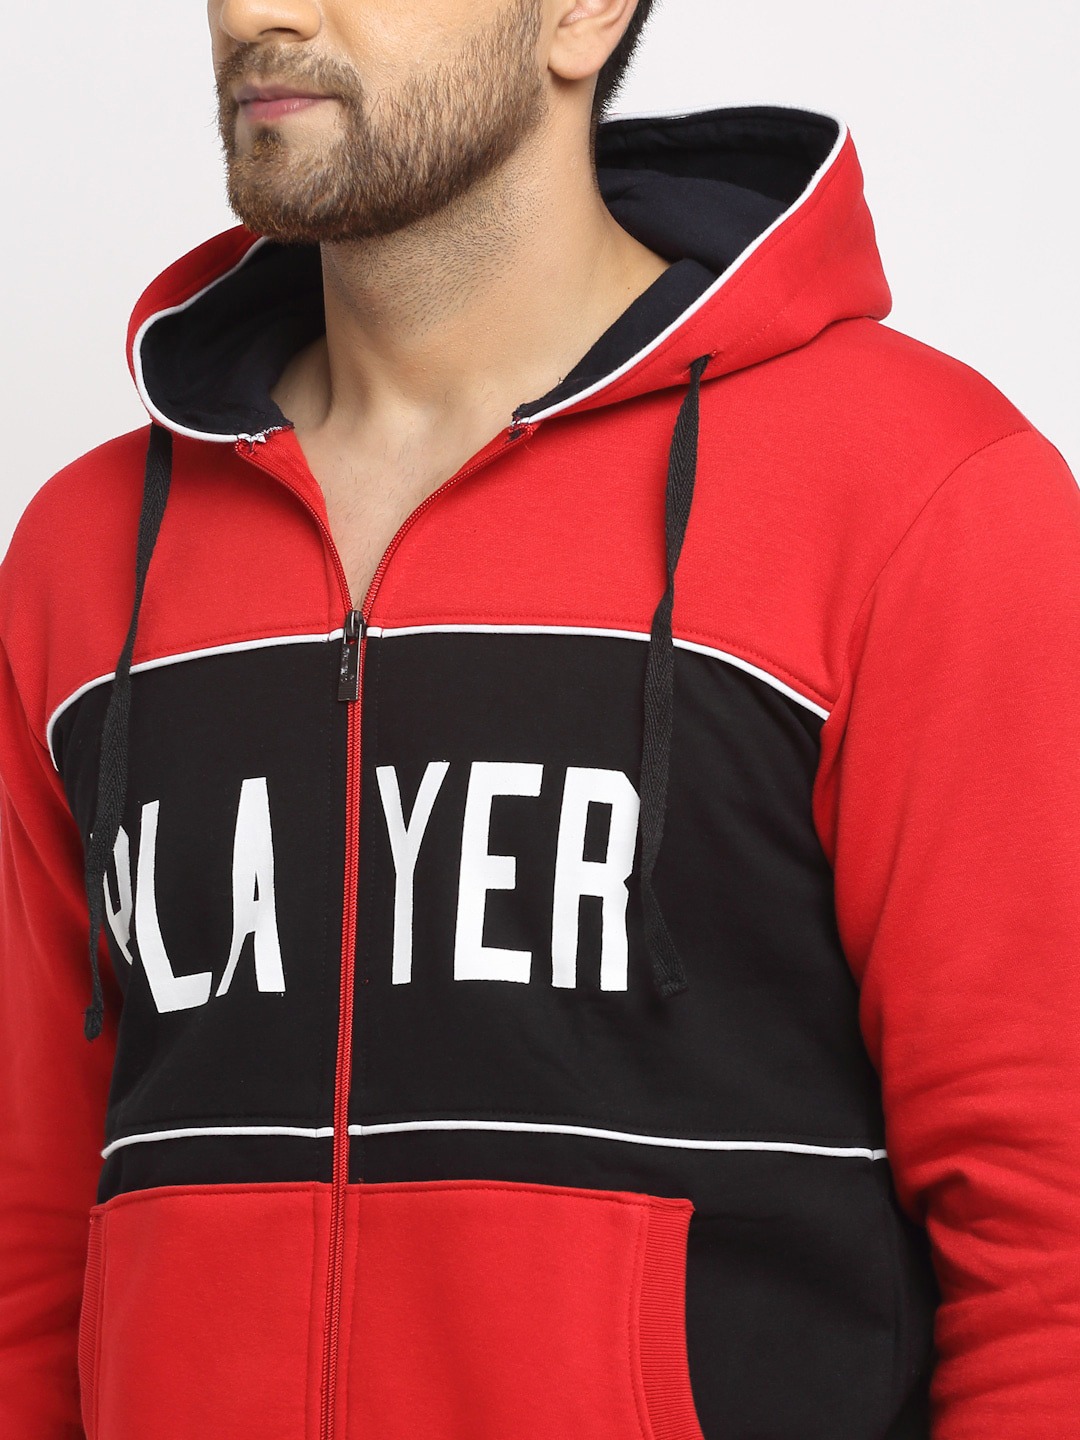 Clothing Tracksuits | WILD WEST Men Red & Black Colourblocked Cotton Tracksuit - VH31721